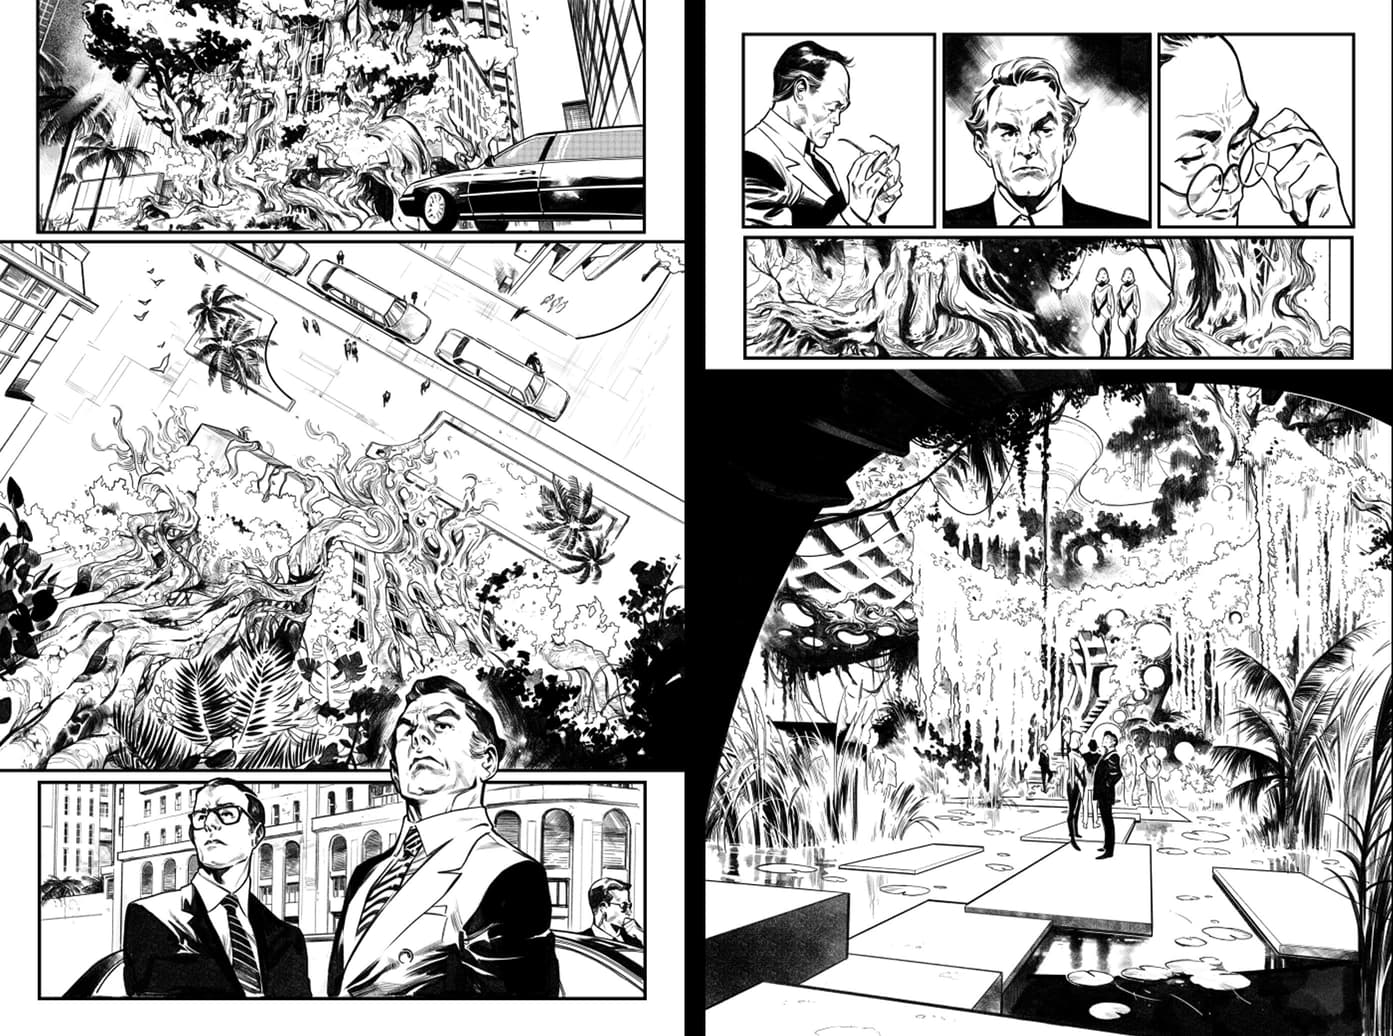 House of X 1 pages 5 and 7